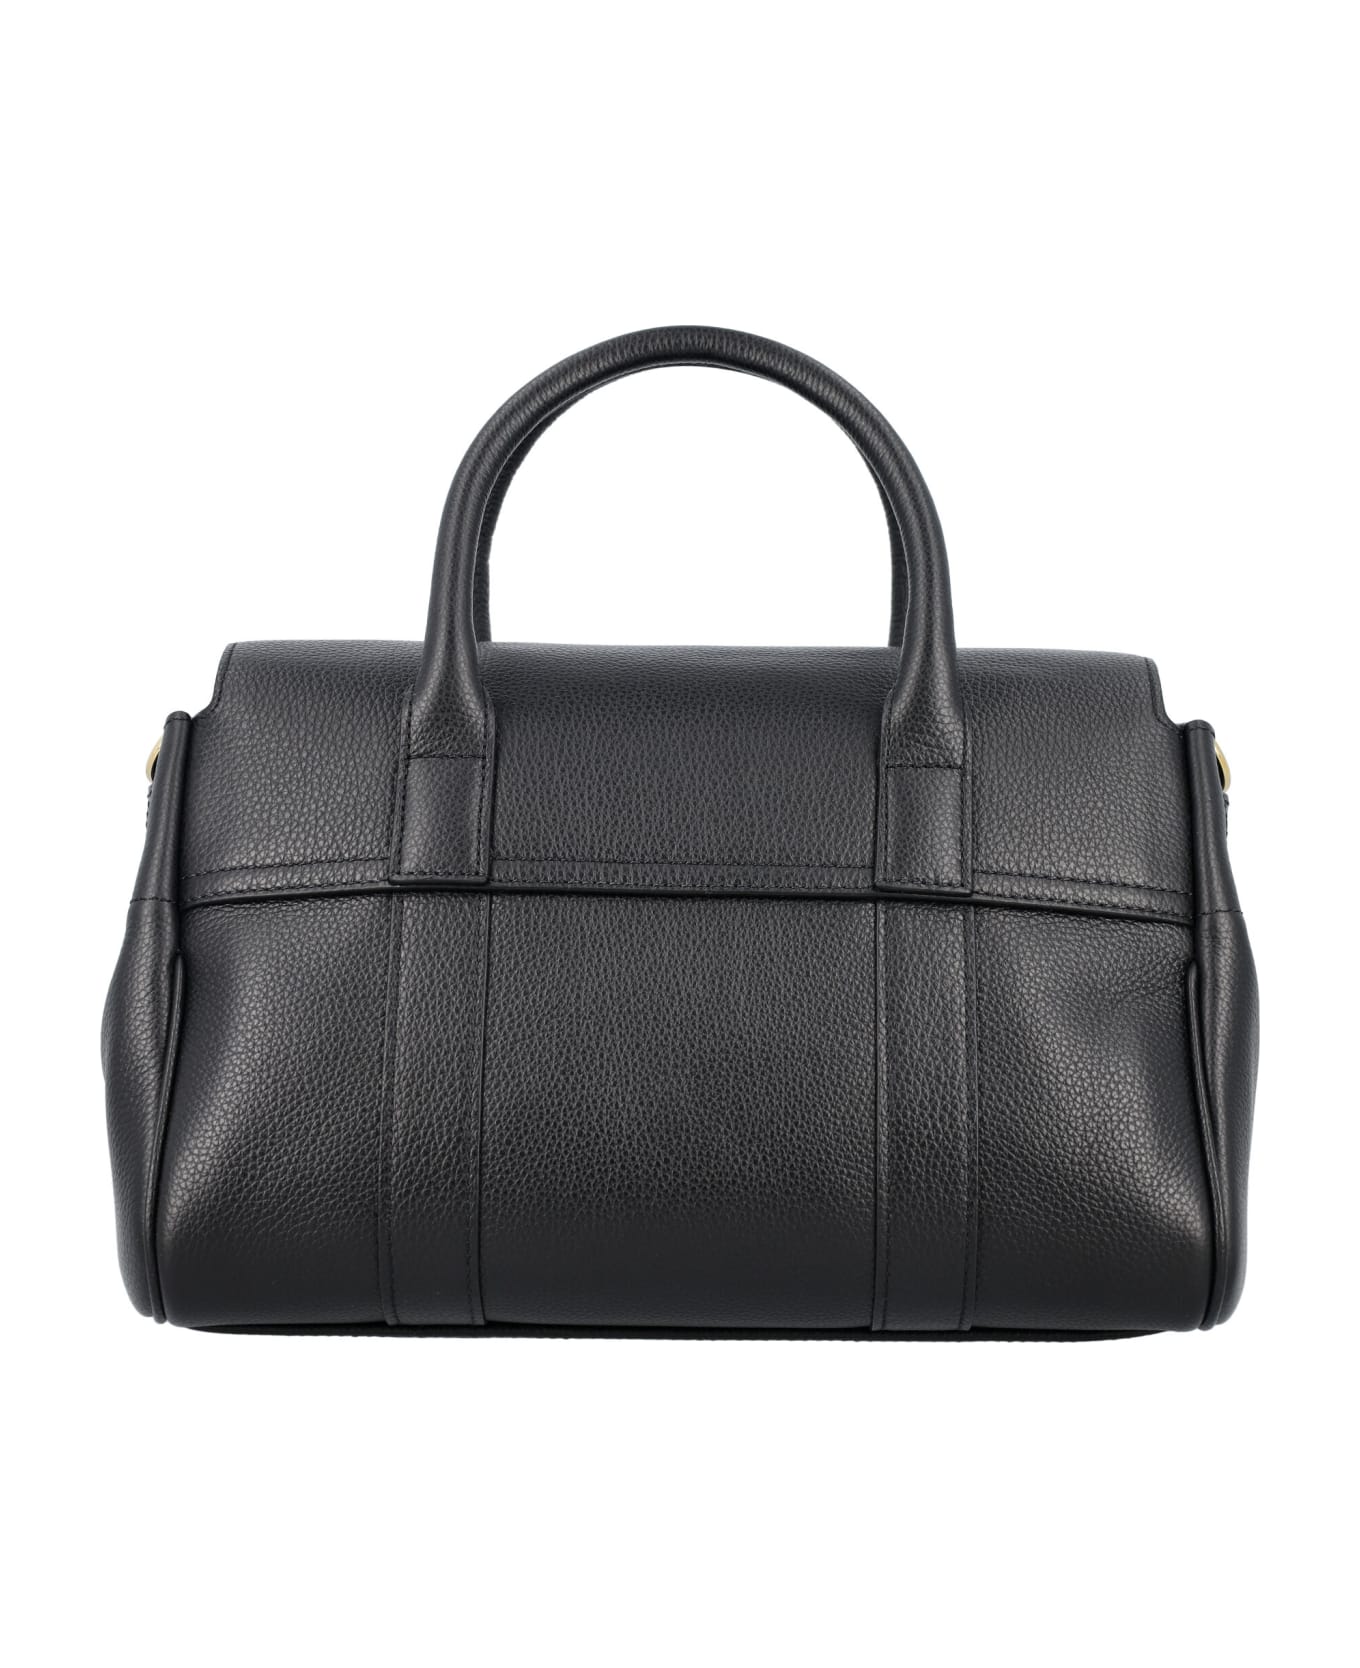 Mulberry Small Bayswater Satchel Bag - BLACK トートバッグ